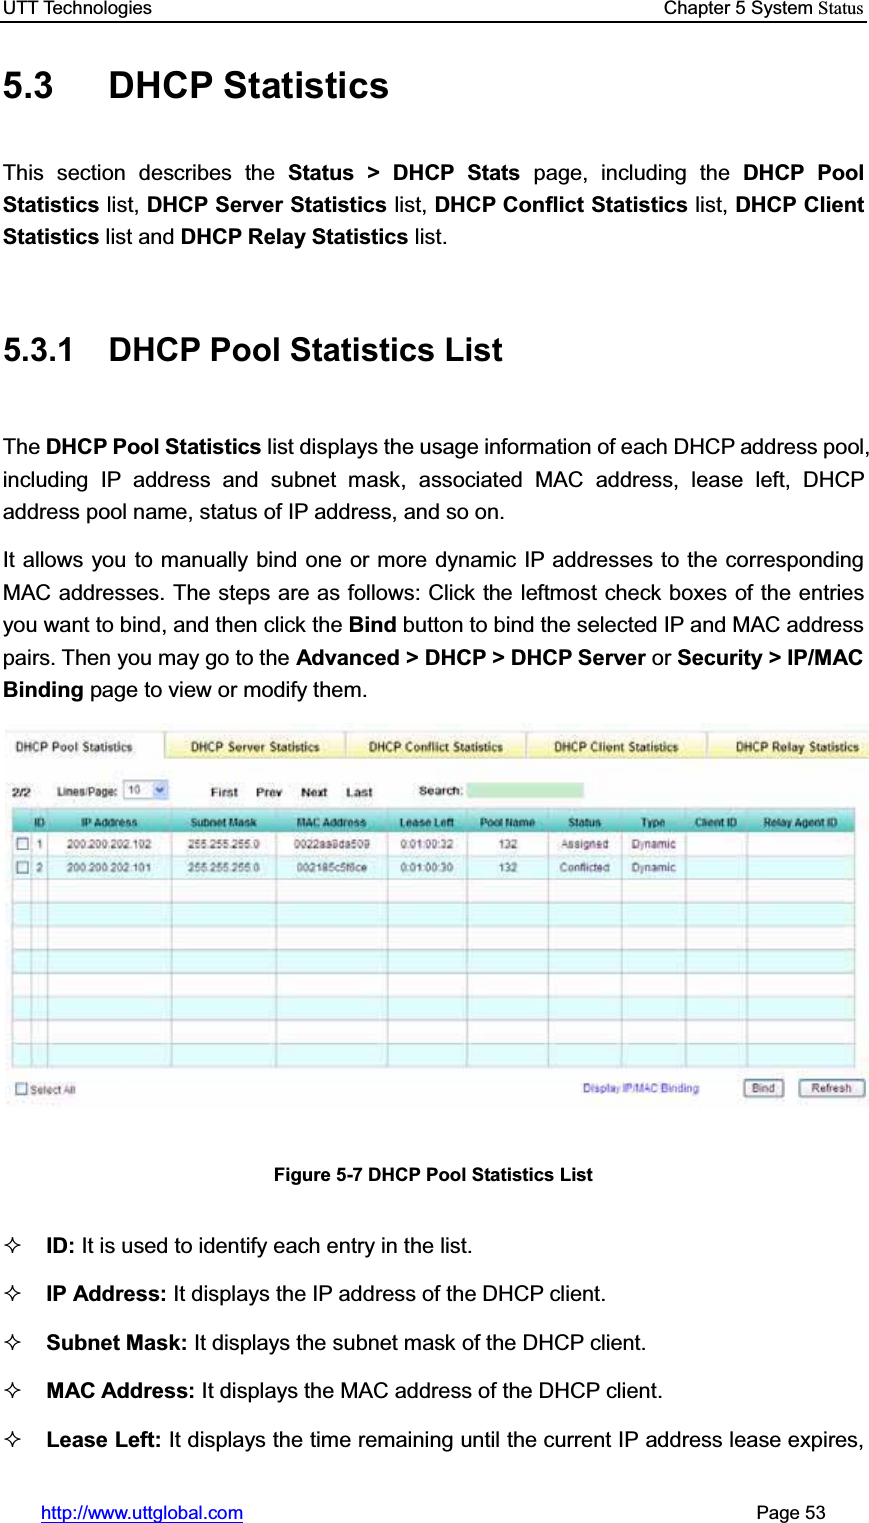 UTT Technologies    Chapter 5 System Statushttp://www.uttglobal.com                                                       Page 53 5.3 DHCP Statistics This section describes the Status &gt; DHCP Stats page, including the DHCP Pool Statistics list, DHCP Server Statistics list, DHCP Conflict Statistics list, DHCP Client Statistics list and DHCP Relay Statistics list.5.3.1 DHCP Pool Statistics List The DHCP Pool Statistics list displays the usage information of each DHCP address pool, including IP address and subnet mask, associated MAC address, lease left, DHCP address pool name, status of IP address, and so on.   It allows you to manually bind one or more dynamic IP addresses to the corresponding MAC addresses. The steps are as follows: Click the leftmost check boxes of the entries you want to bind, and then click the Bind button to bind the selected IP and MAC address pairs. Then you may go to the Advanced &gt; DHCP &gt; DHCP Server or Security &gt; IP/MAC Binding page to view or modify them.   Figure 5-7 DHCP Pool Statistics List ID: It is used to identify each entry in the list.IP Address: It displays the IP address of the DHCP client. Subnet Mask: It displays the subnet mask of the DHCP client. MAC Address: It displays the MAC address of the DHCP client.Lease Left: It displays the time remaining until the current IP address lease expires, 